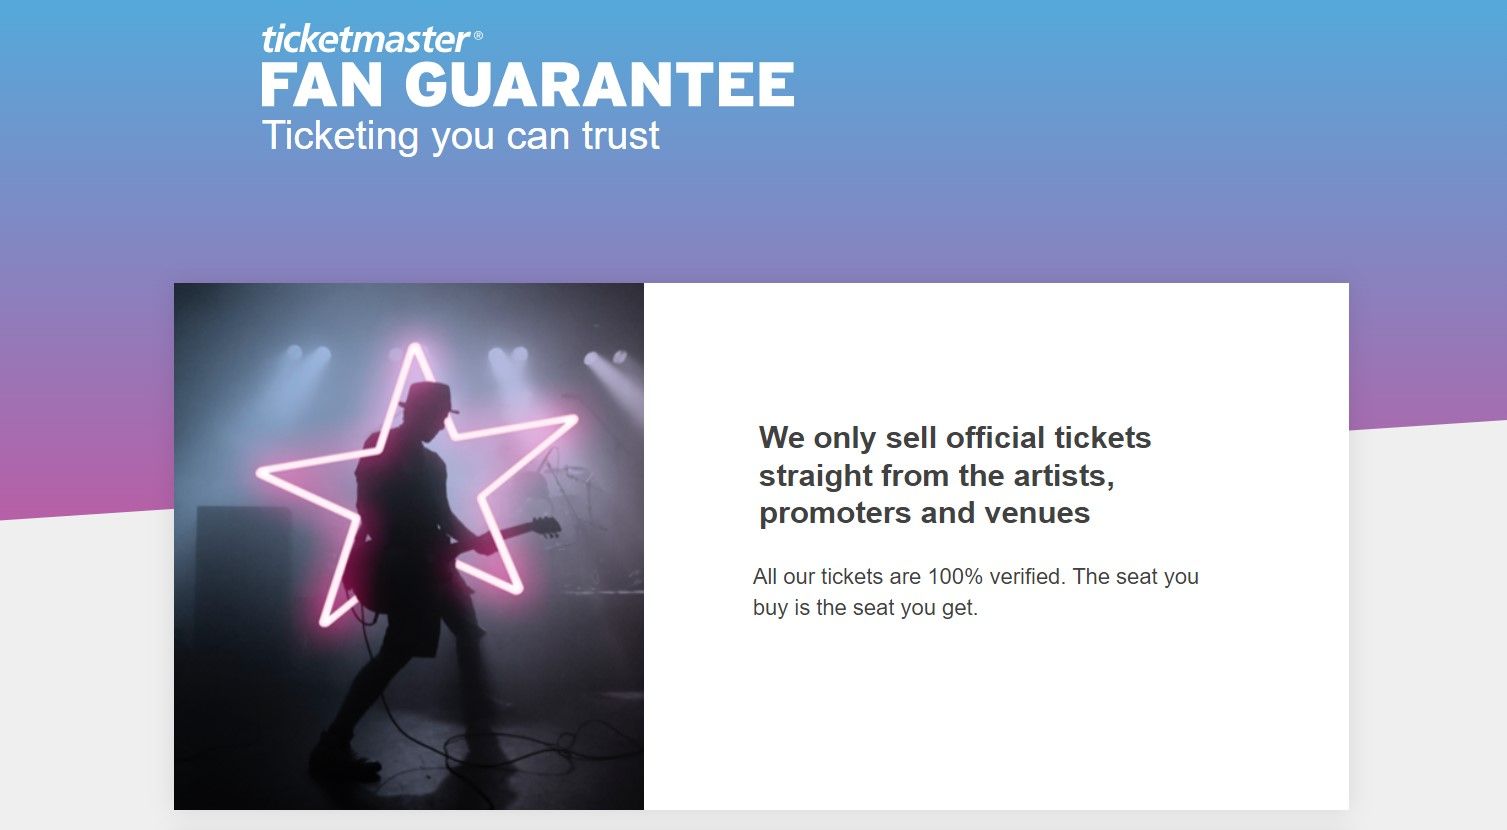 Ticketmaster website image of its fan guarantee disclaimer.